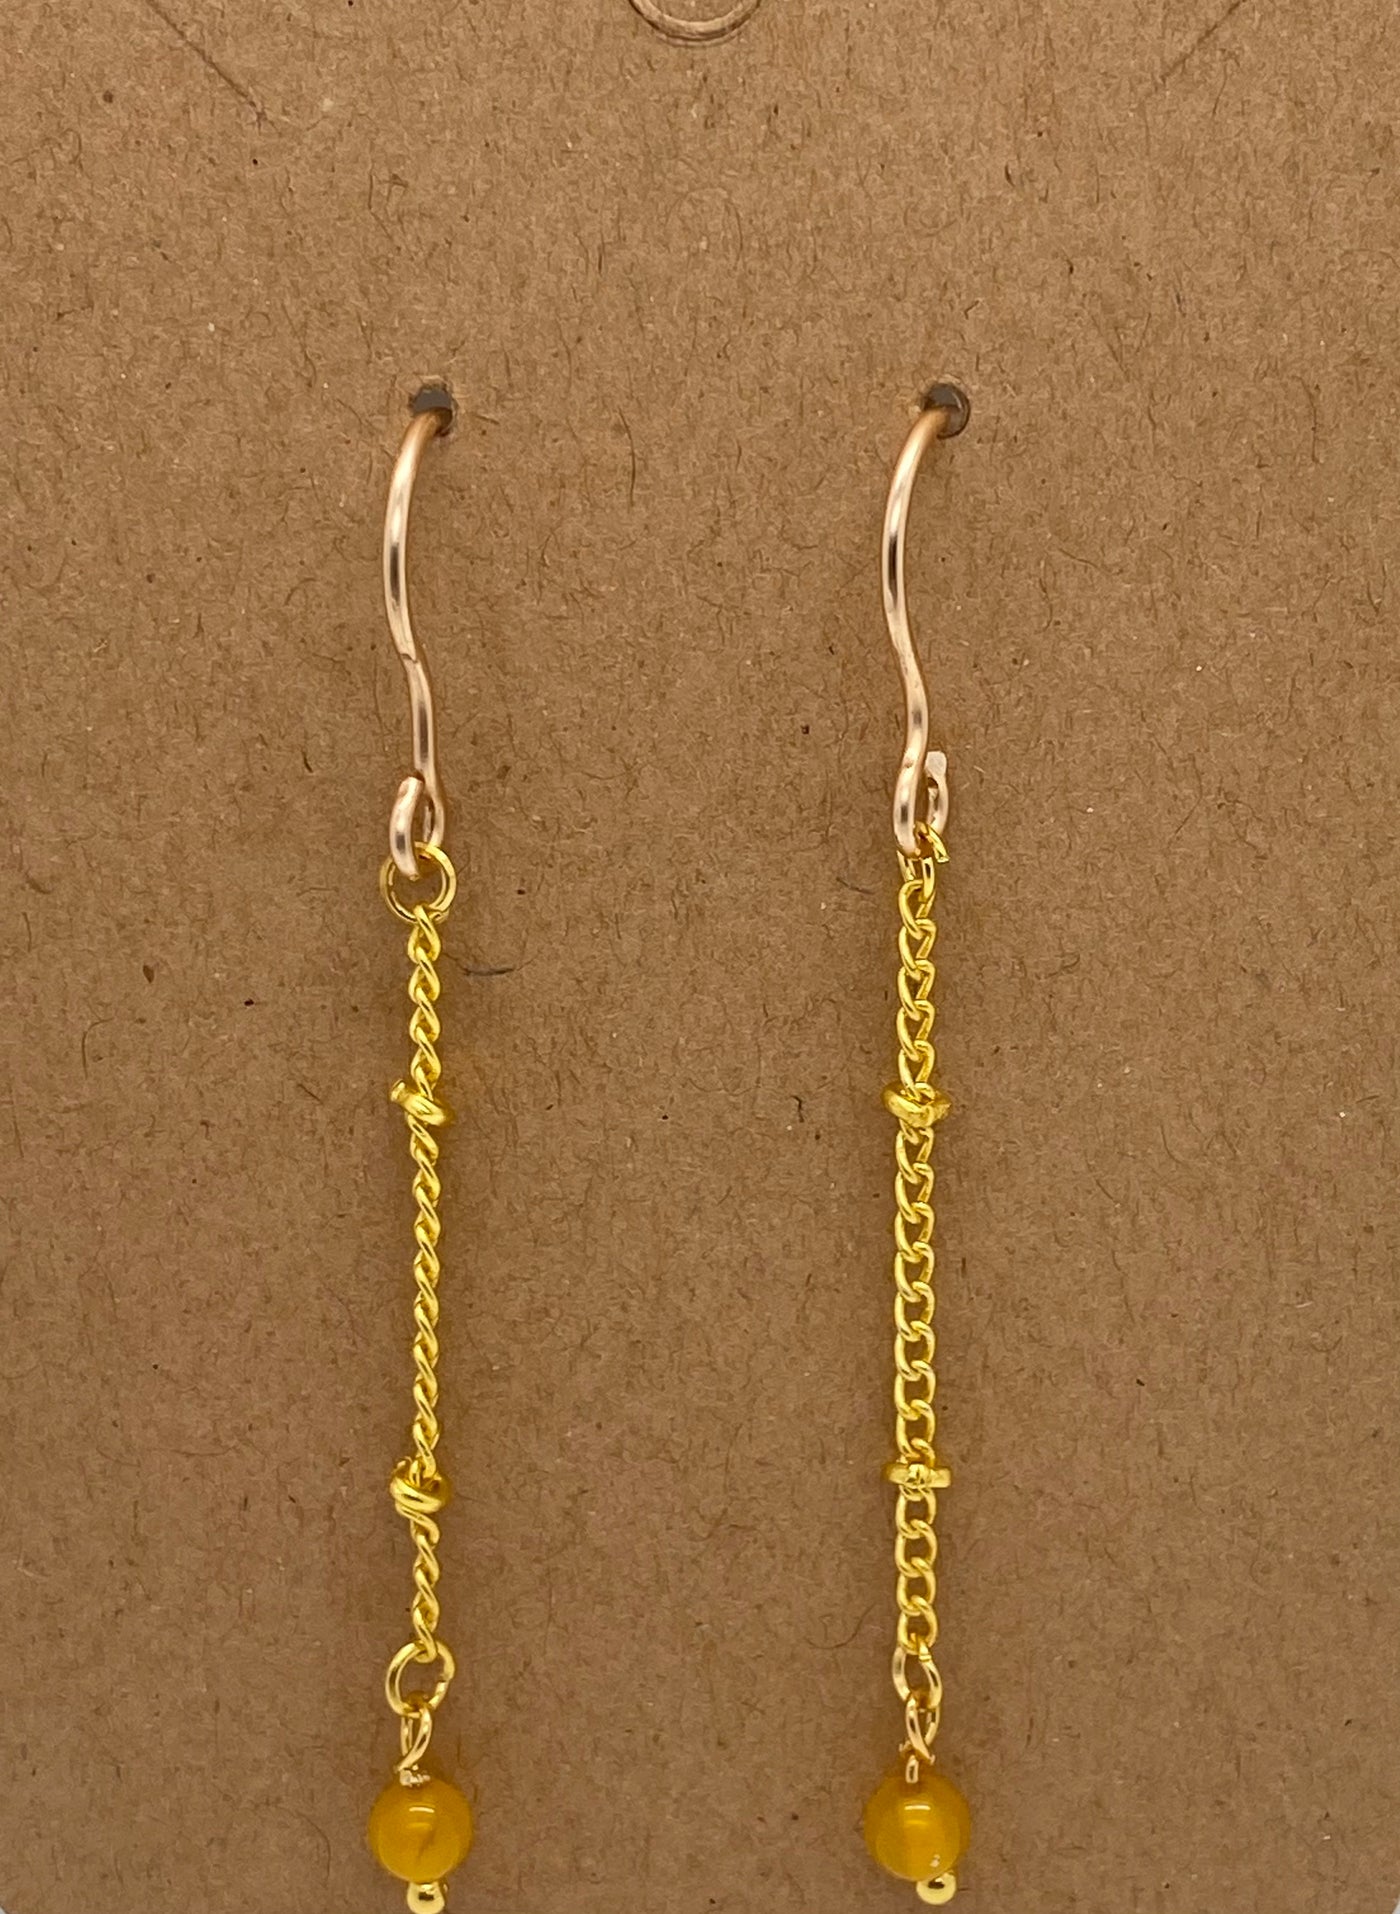 Chain earrings with yellow agate